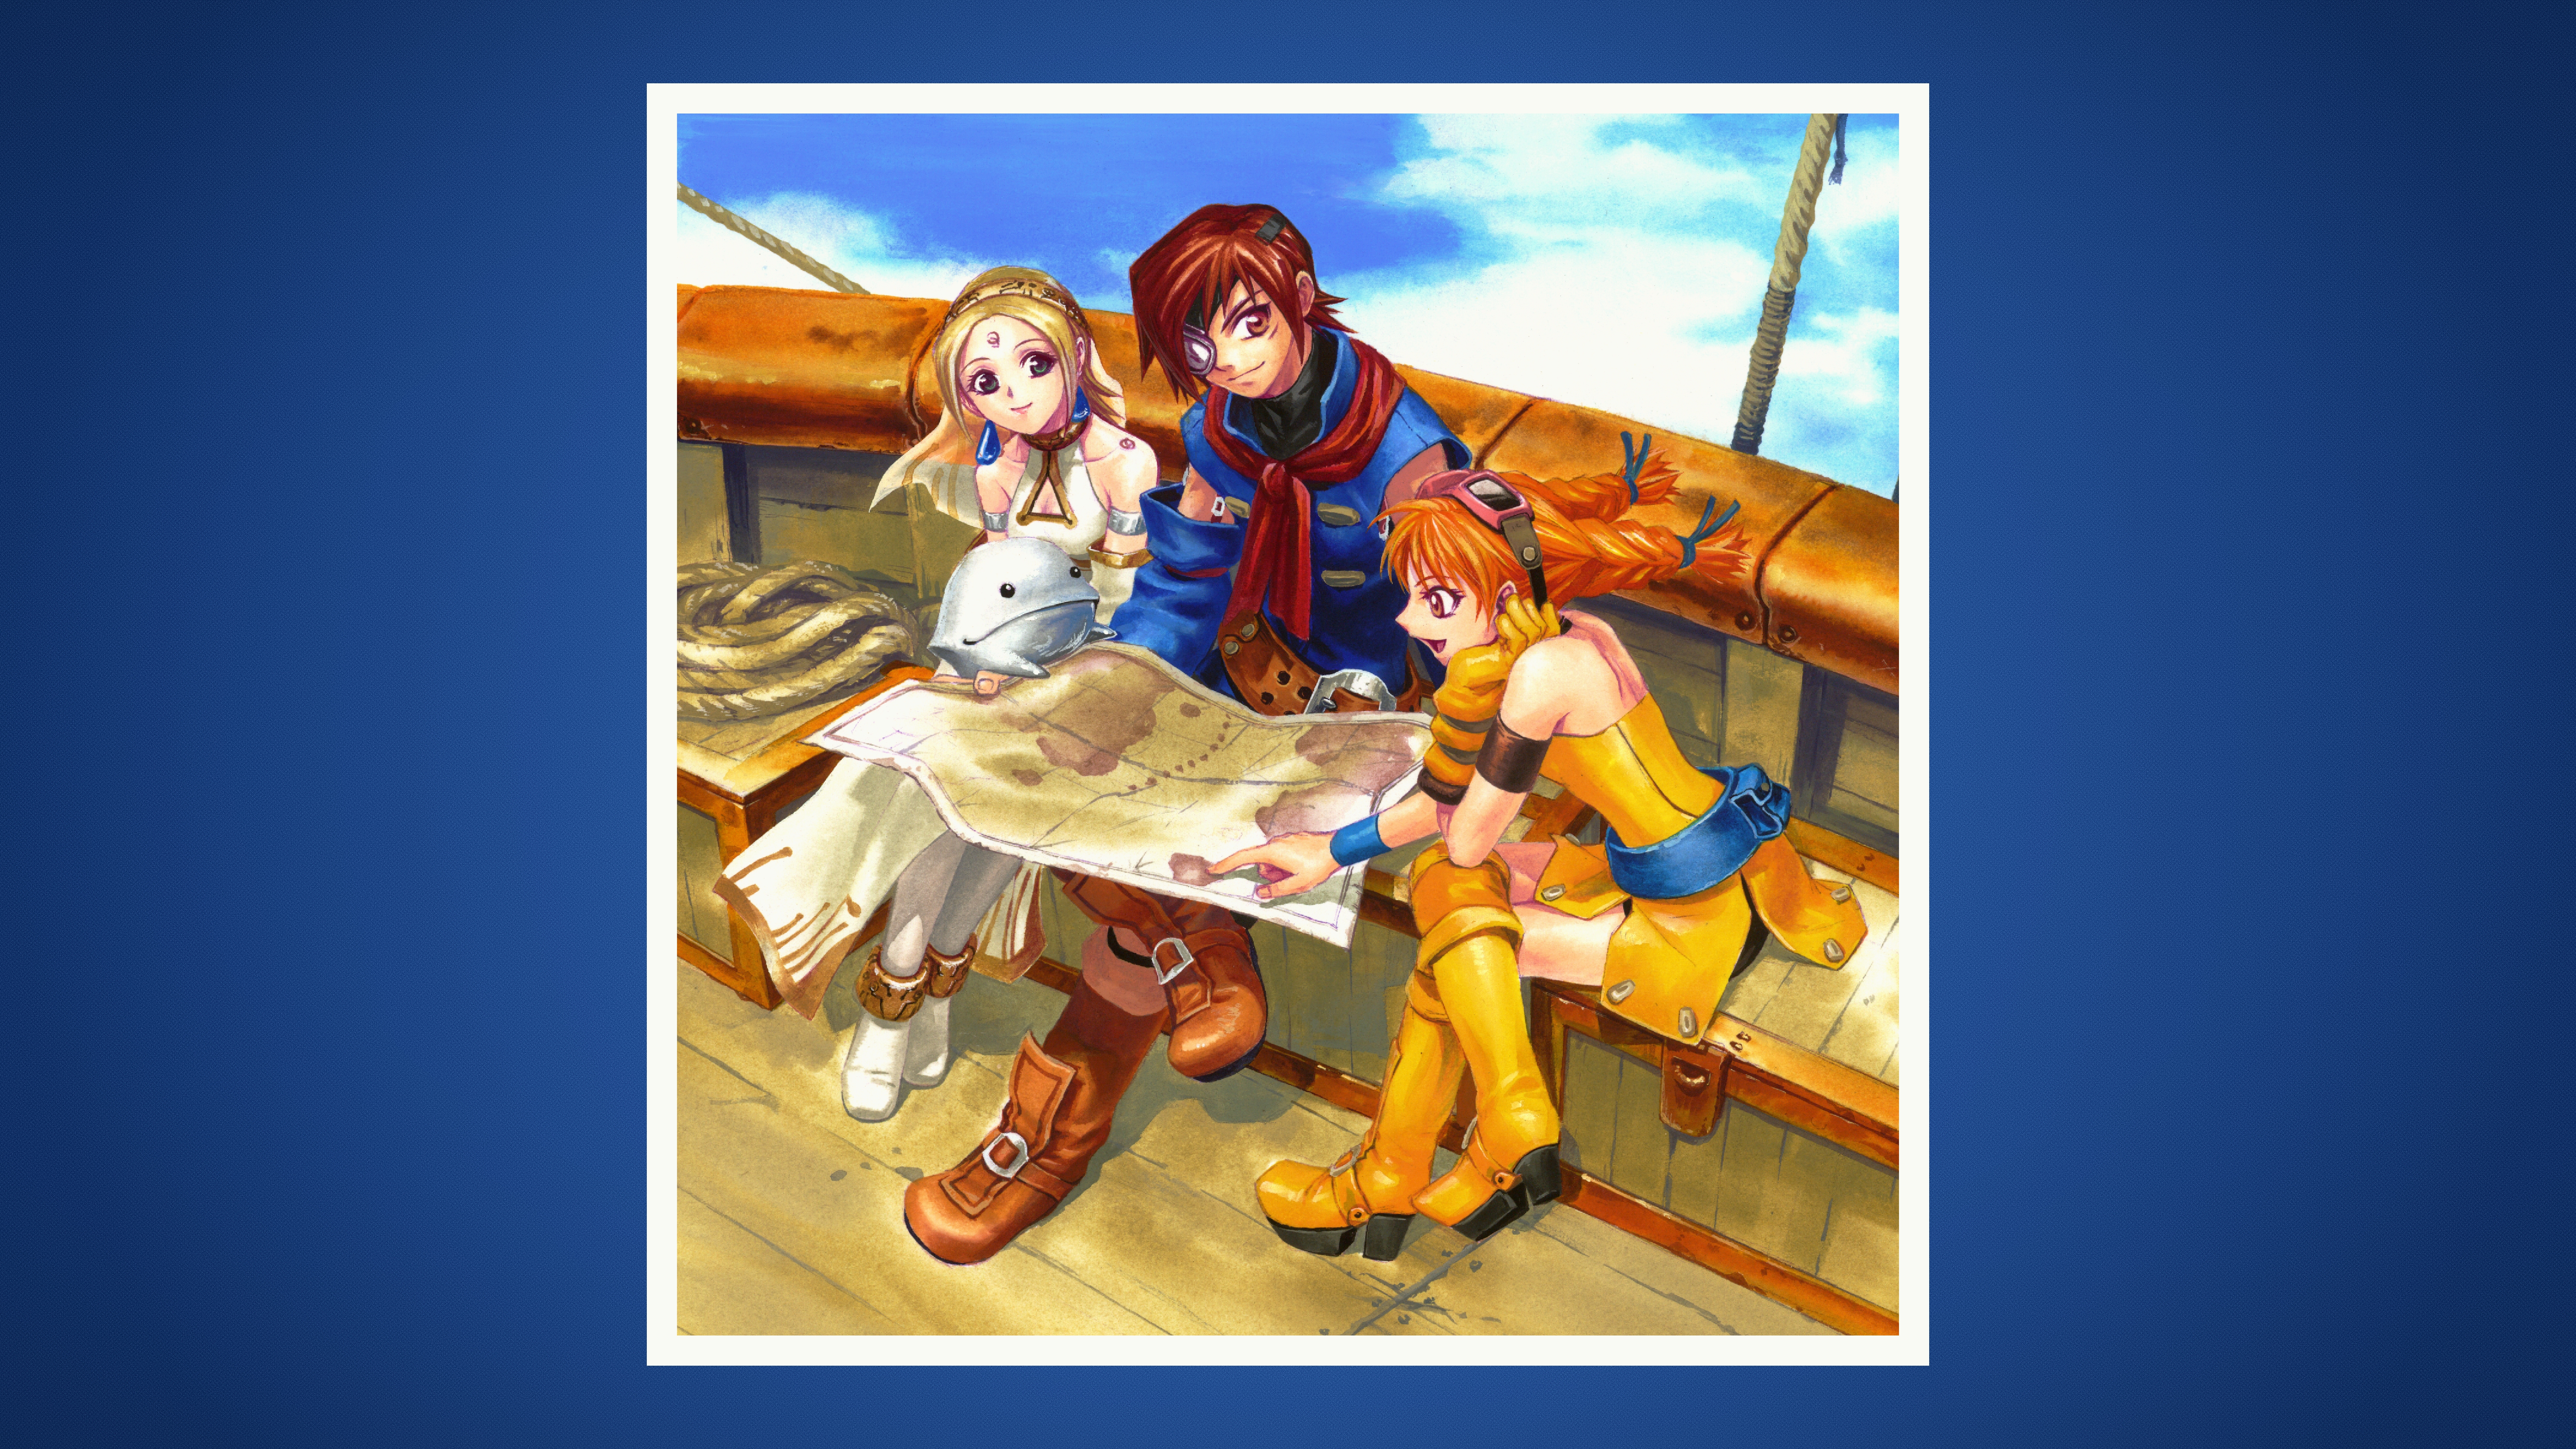 Anime 6400x3600 video games minimalism video game boys video game girls simple background Skies of Arcadia Fina (Skies of Arcadia) Vyse (Skies of Arcadia) Aika (Skies of Arcadia) pirates ship skirt miniskirt dress white dress blonde redhead brunette eyepatches glasses twintails braids clouds scarf detached sleeves earring tattoo Cupil (Skies of Arcadia) cleavage cutout map boots leather boots ropes rigging (ship) knee-high boots